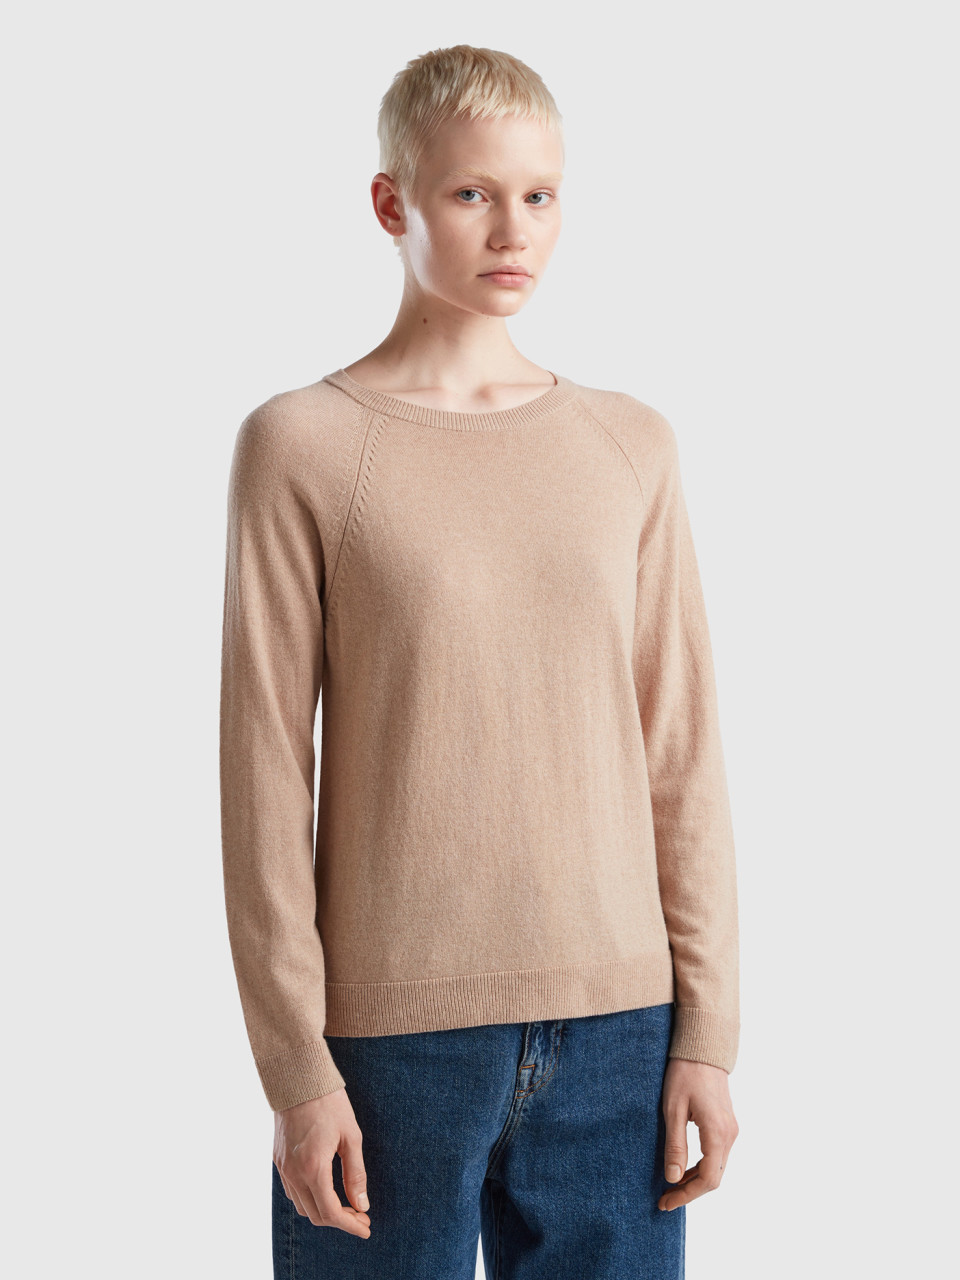 Benetton, Camel Crew Neck Sweater In Cashmere And Wool Blend, Beige, Women